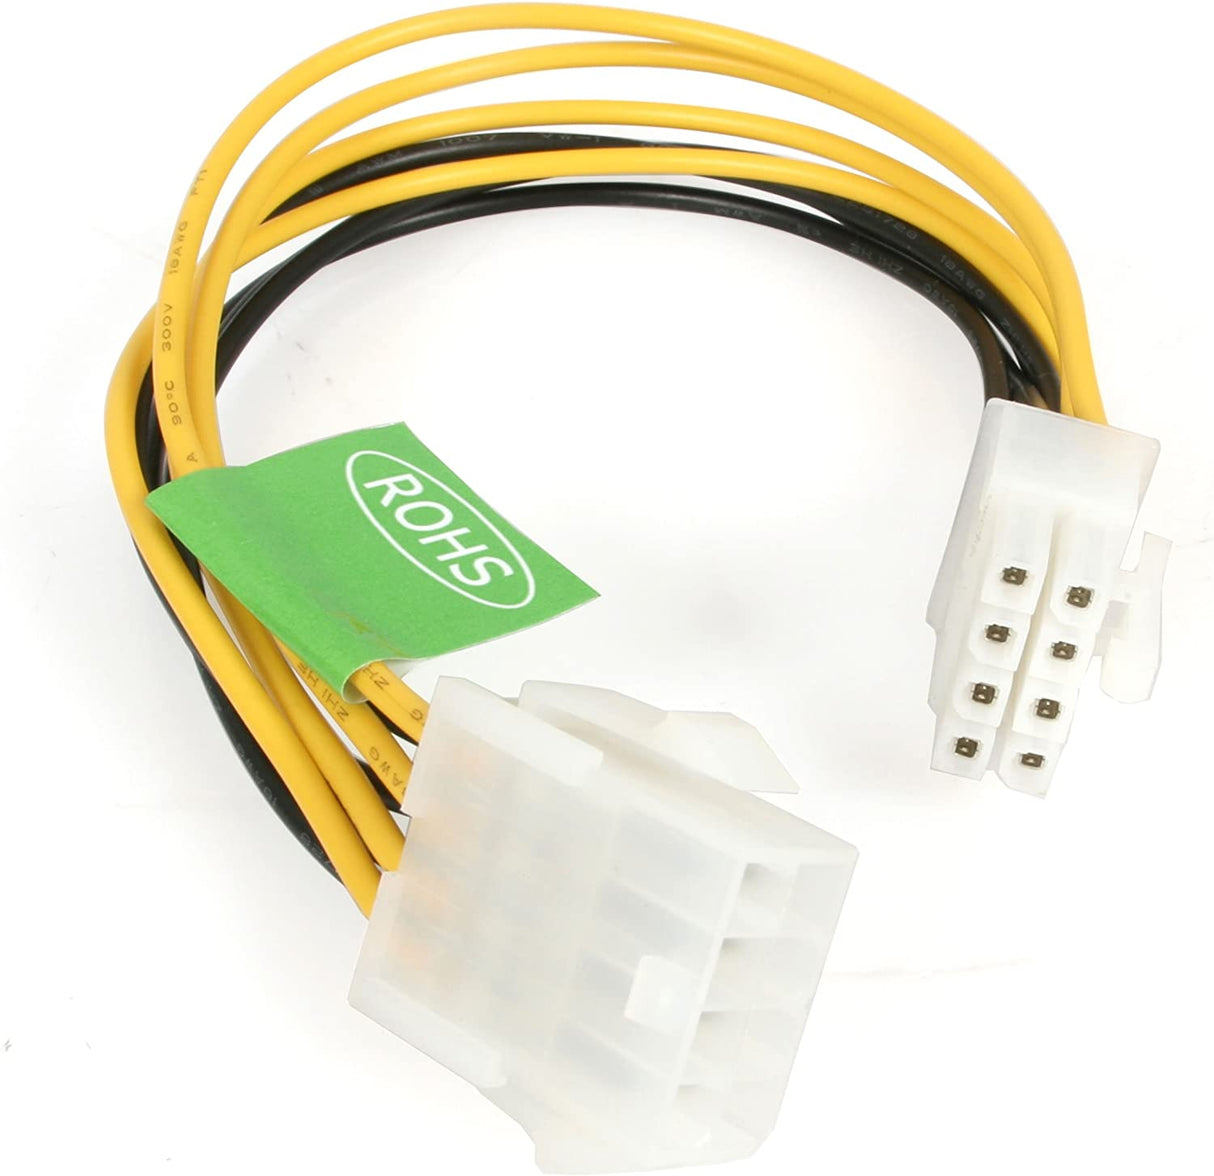 StarTech.com EPS 8 Pin Power Extension Cable - Power extension cable - 8 pin EPS12V (F) to 8 pin EPS12V (M) - 7.9 in - EPS8EXT,Yellow